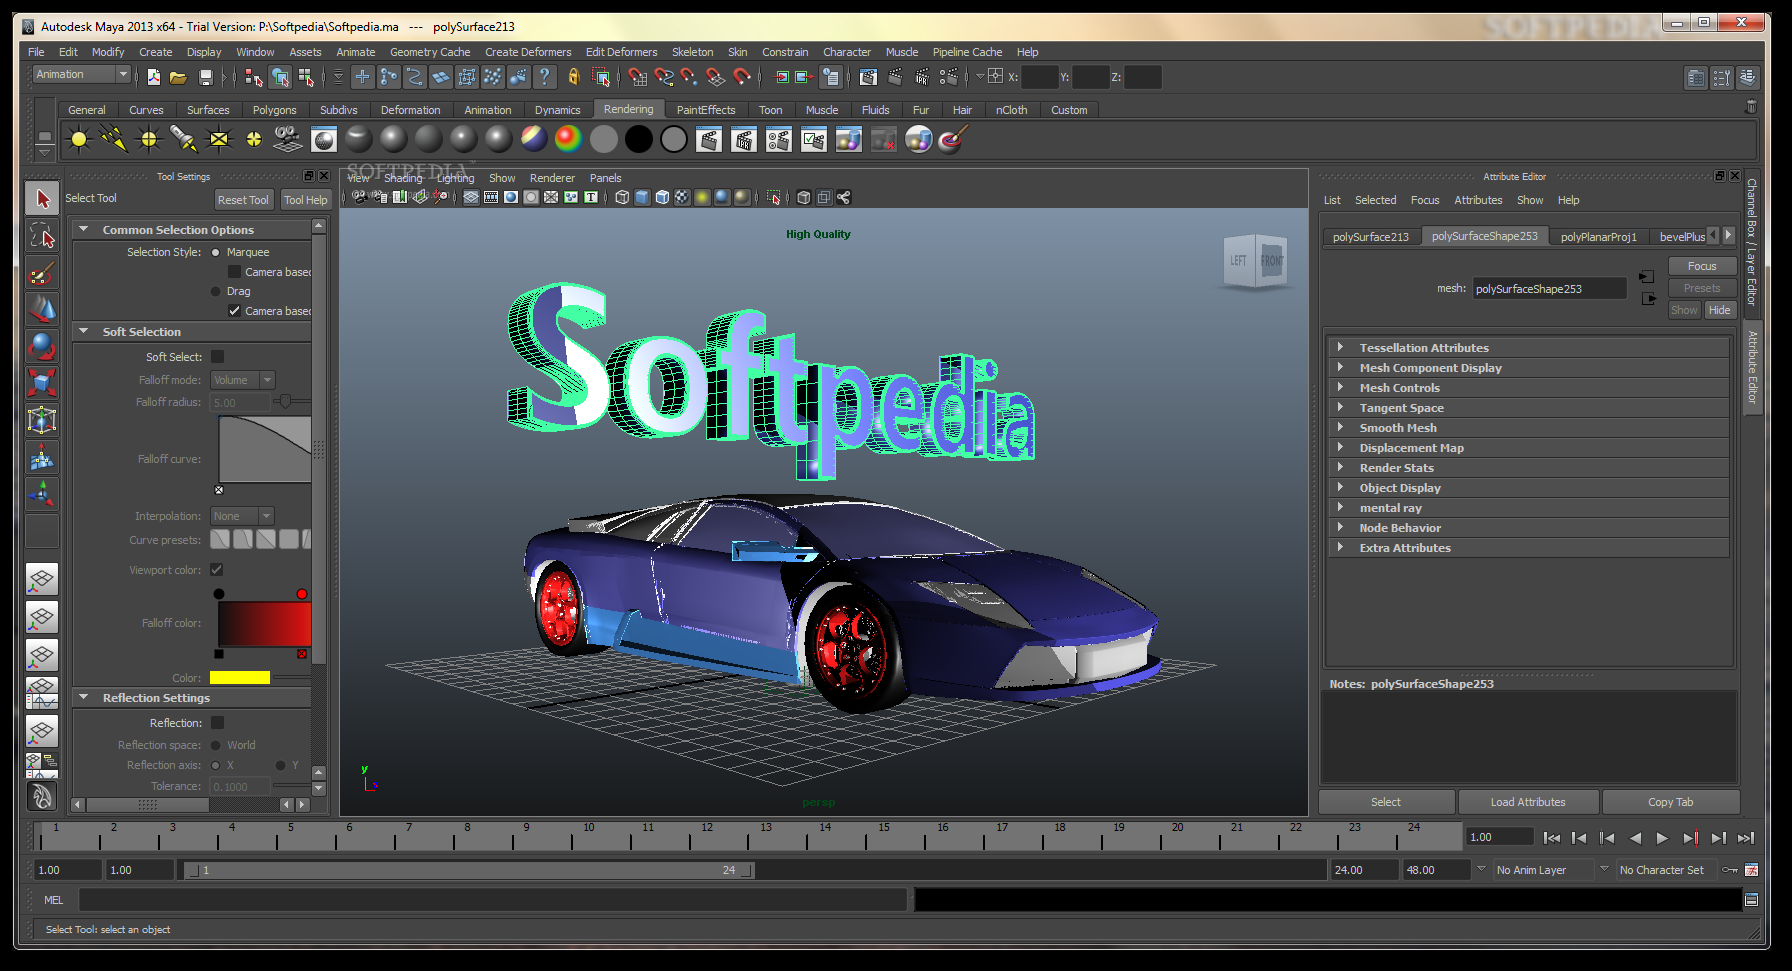 Top 46 Science Cad Apps Like Autodesk Entertainment Creation Suite Ultimate - Best Alternatives